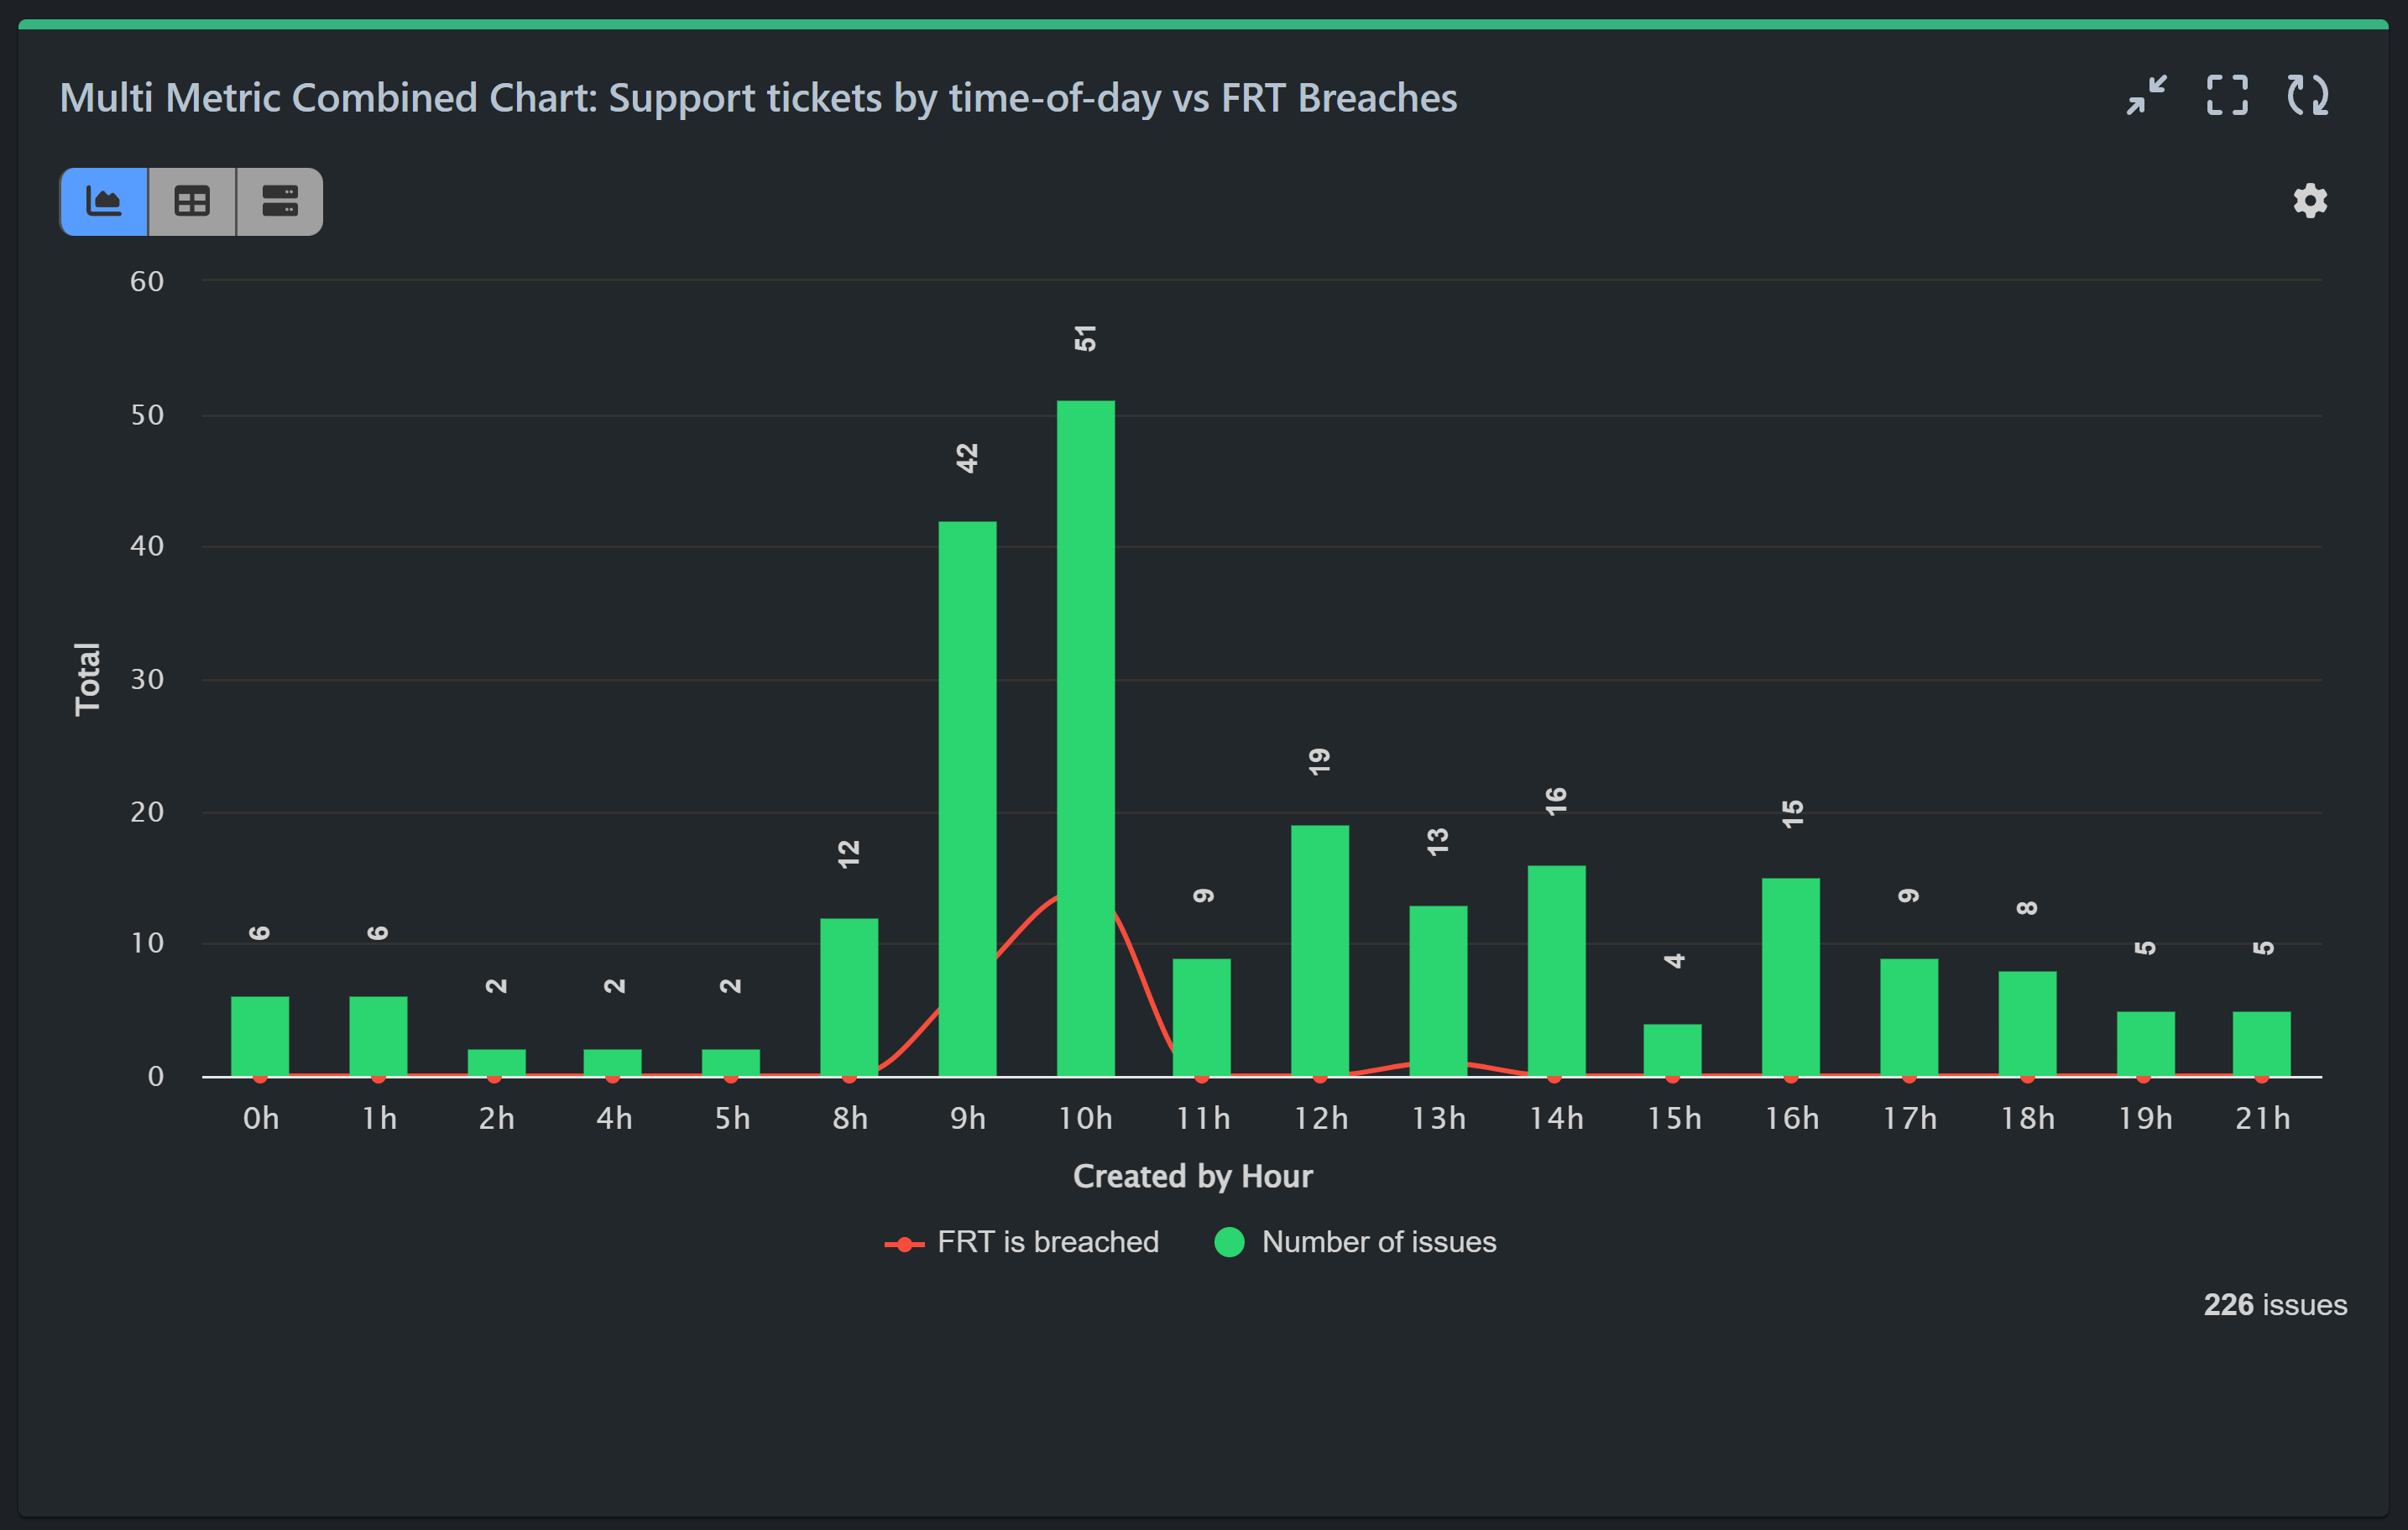 Support requests vs FRT breached
